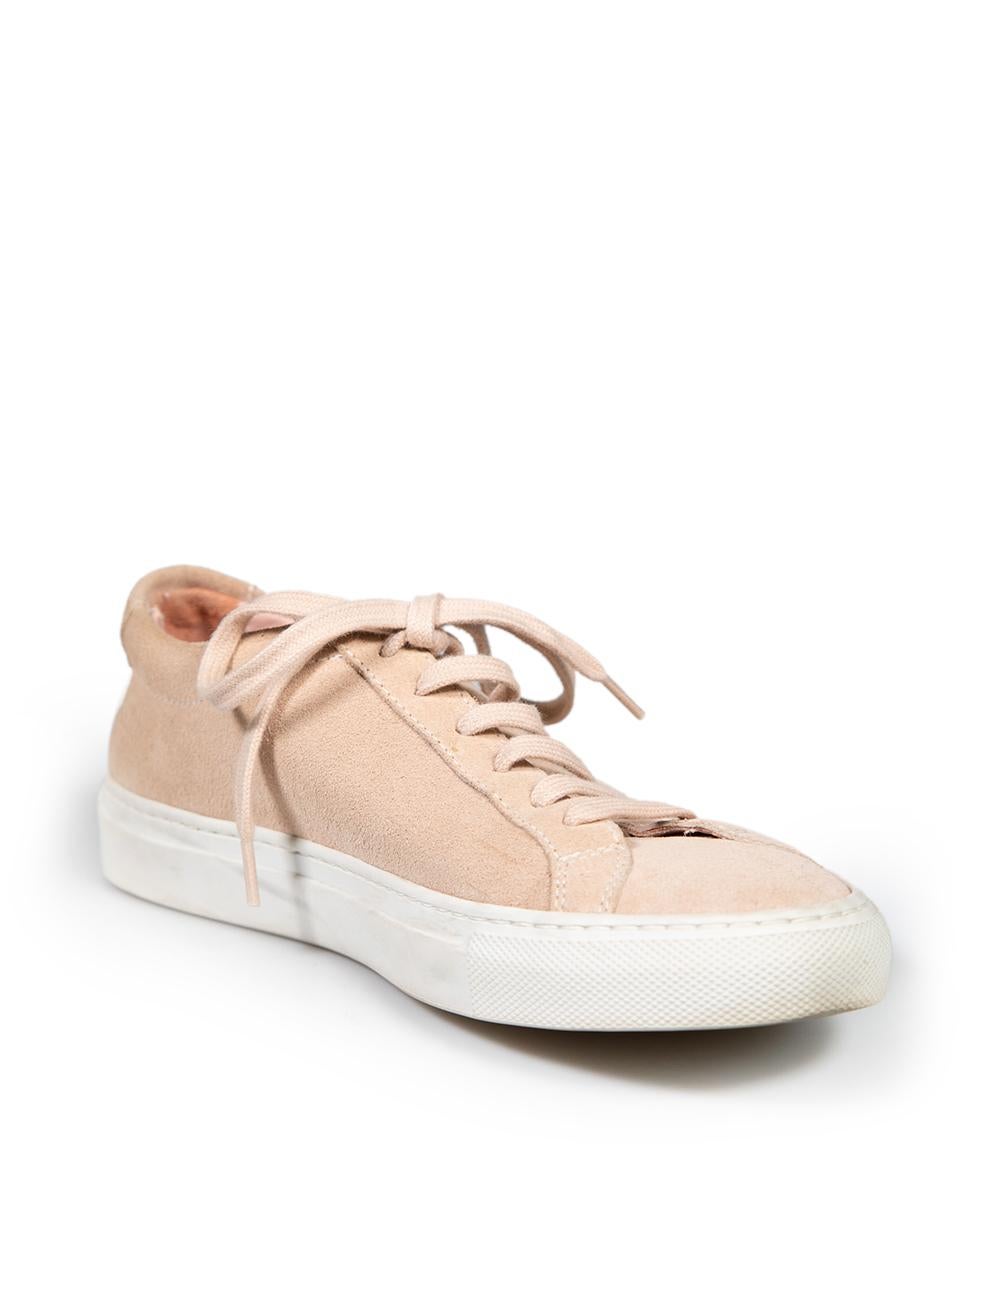 CONDITION is Very good. Minimal wear to shoes is evident. Minimal wear to the sole is seen with discolouration marks and a tiny tear in the leather on the insole on this used Common Projects designer resale item.
 
 
 
 Details
 
 
 Pink
 
 Suede
 
